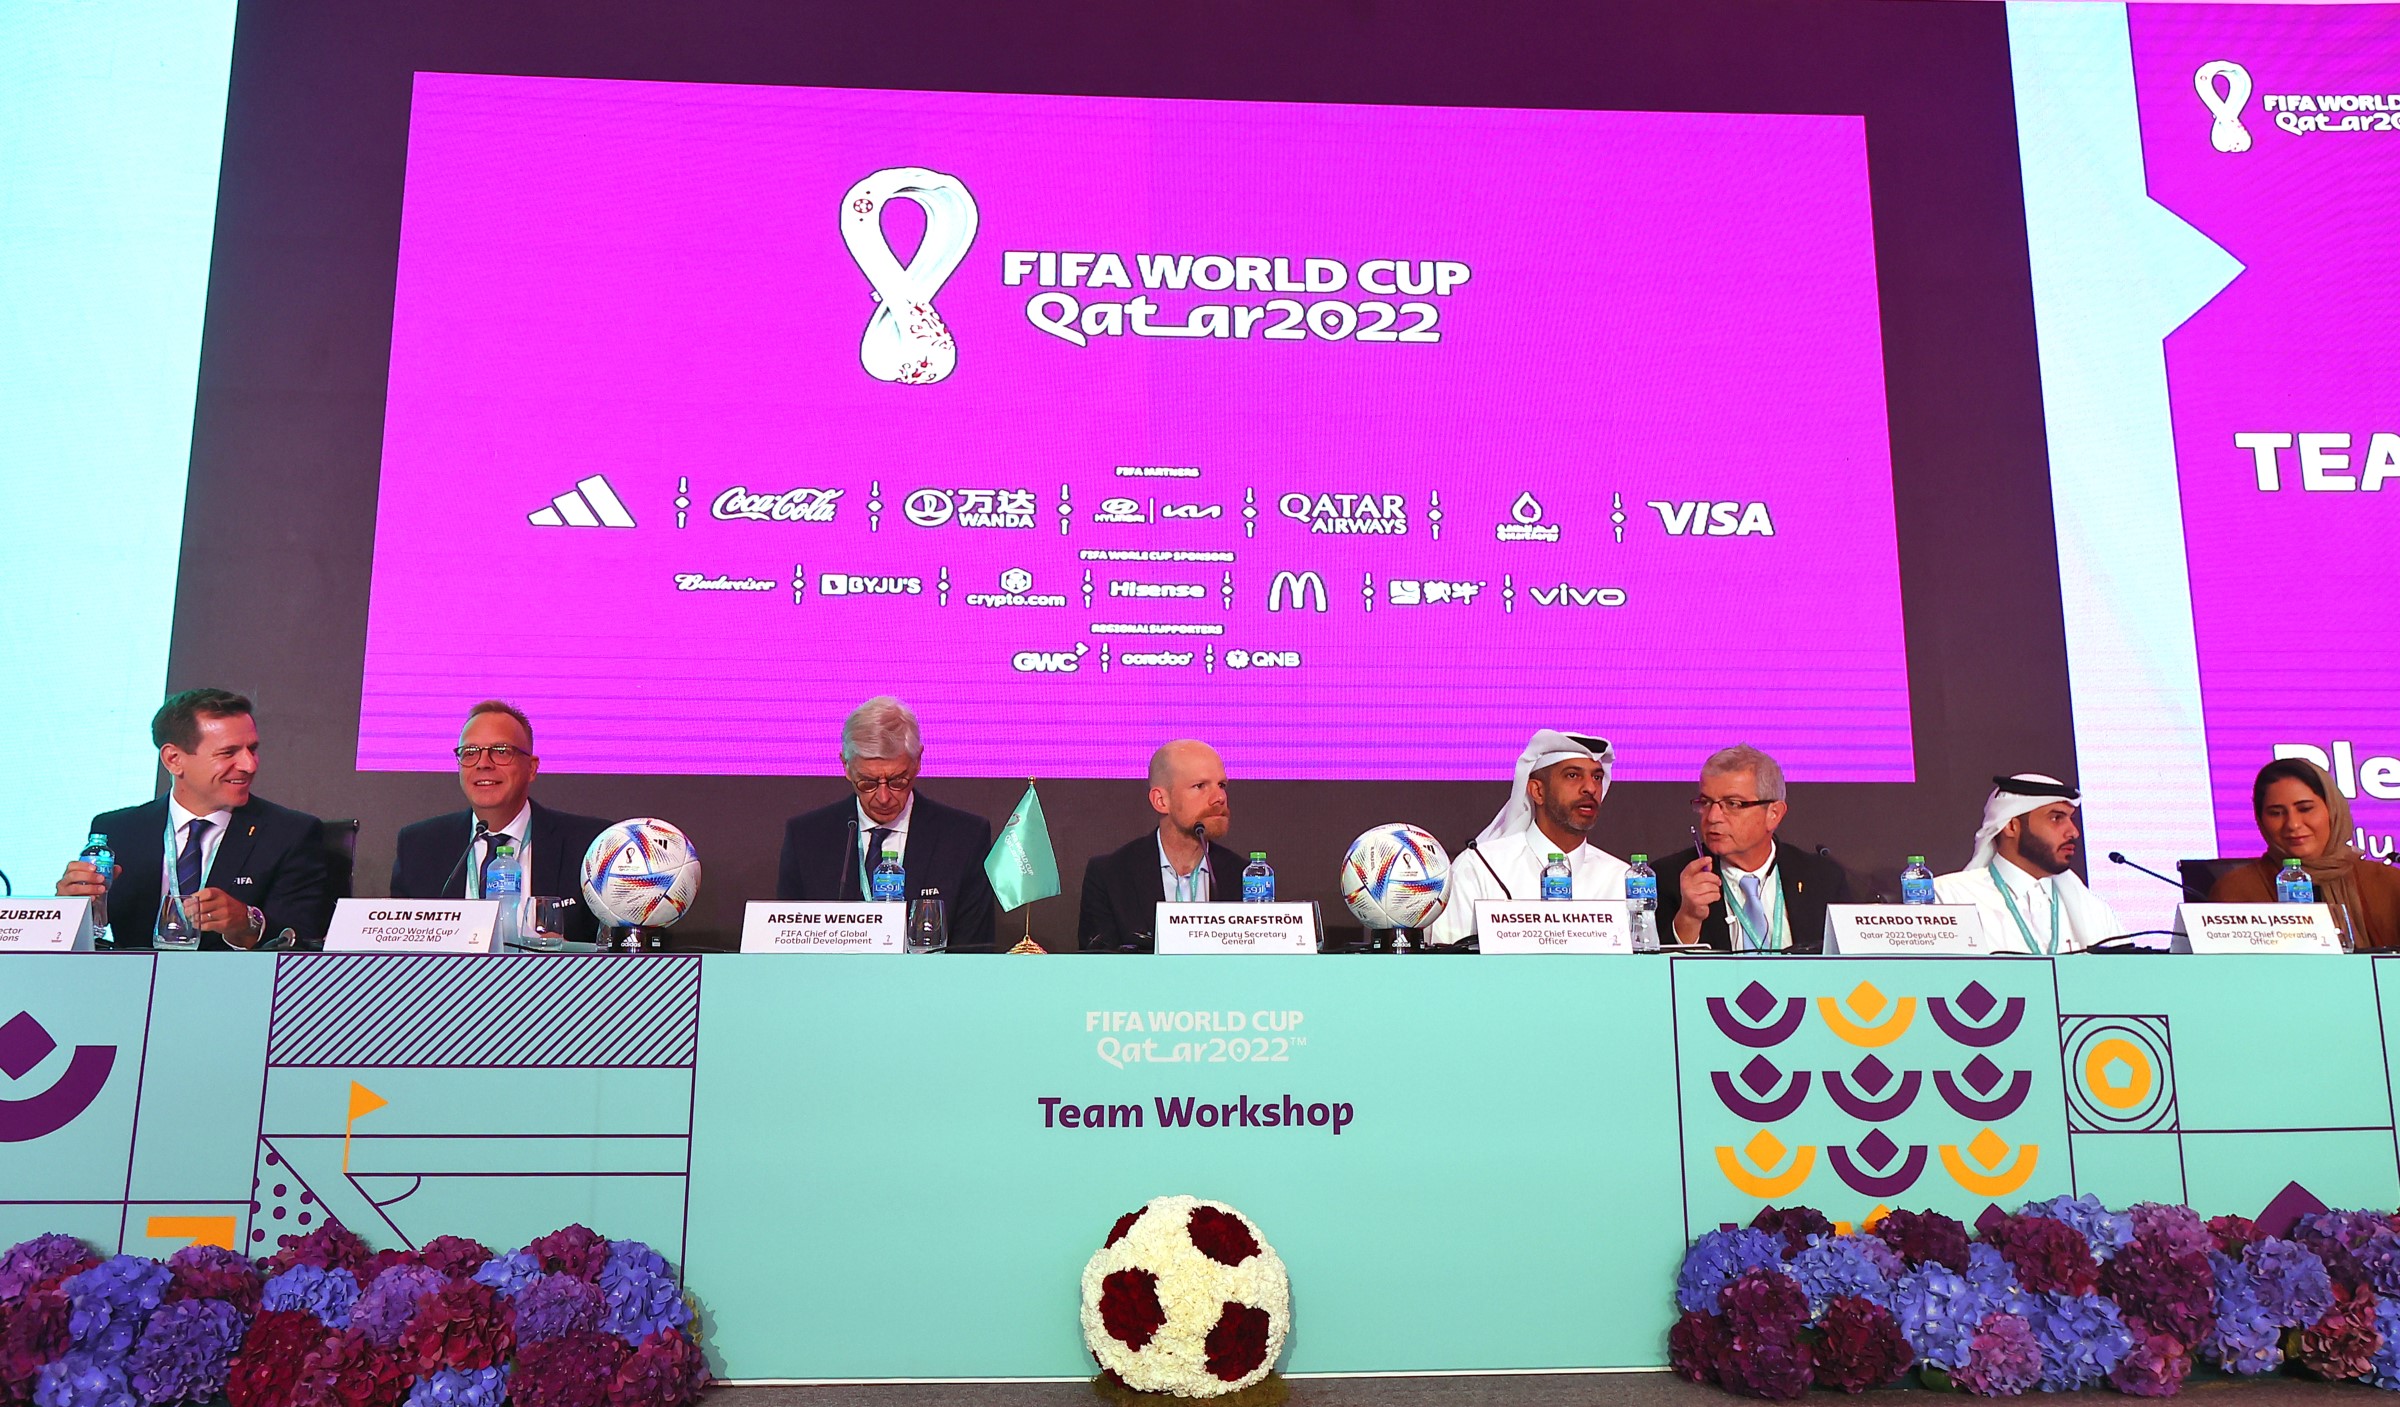 FIFA World Cup 2022 means so much to Qatar in terms of exposure to world